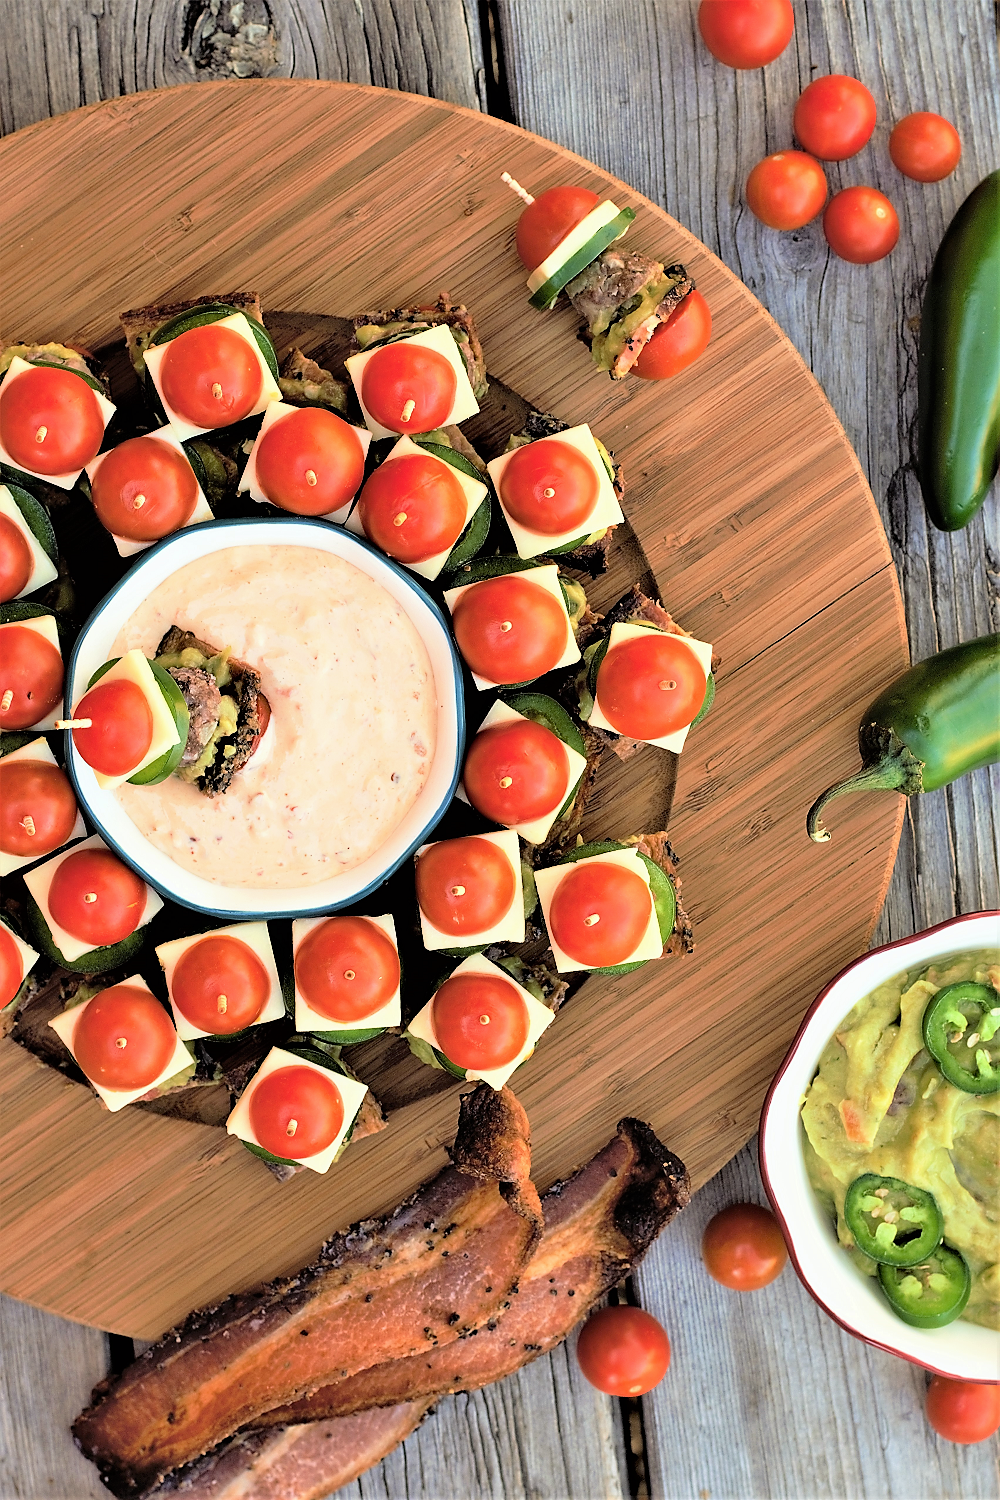 One giant delicious bite of meatballs, thick bacon, guacamole, jack cheese, & jalapeño slices skewered between cherry tomato 'buns' for the perfect healthyish party food!